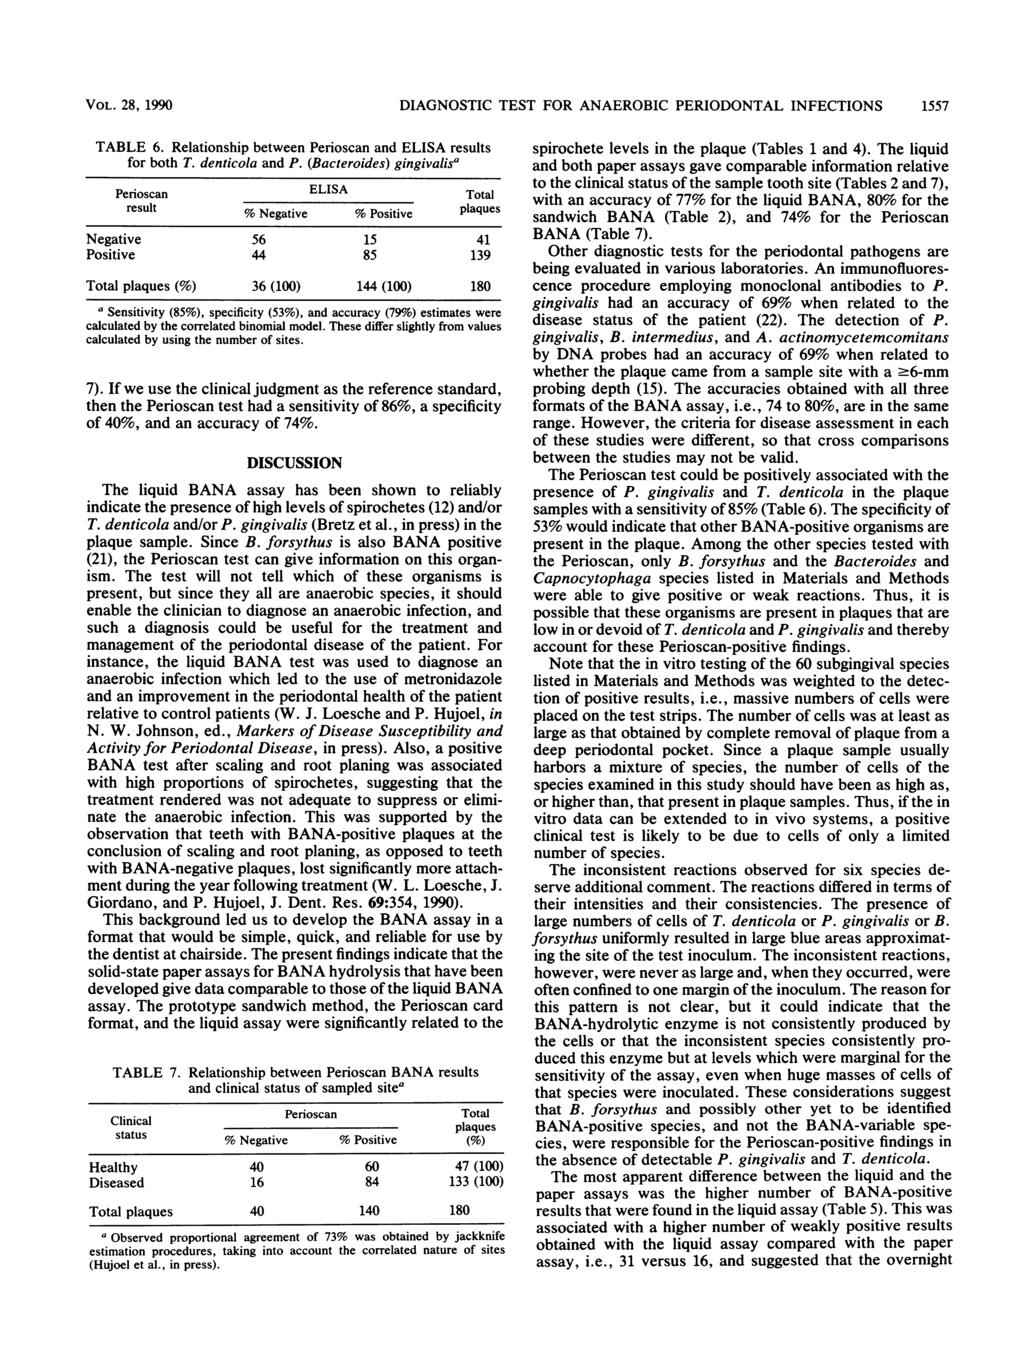 VOL. 28, 1990 DIAGNOSTIC TEST FOR ANAEROBIC PERIODONTAL INFECTIONS 1557 TABLE 6. Reltionship etween Perioscn nd ELISA results for oth T. denticol nd P.